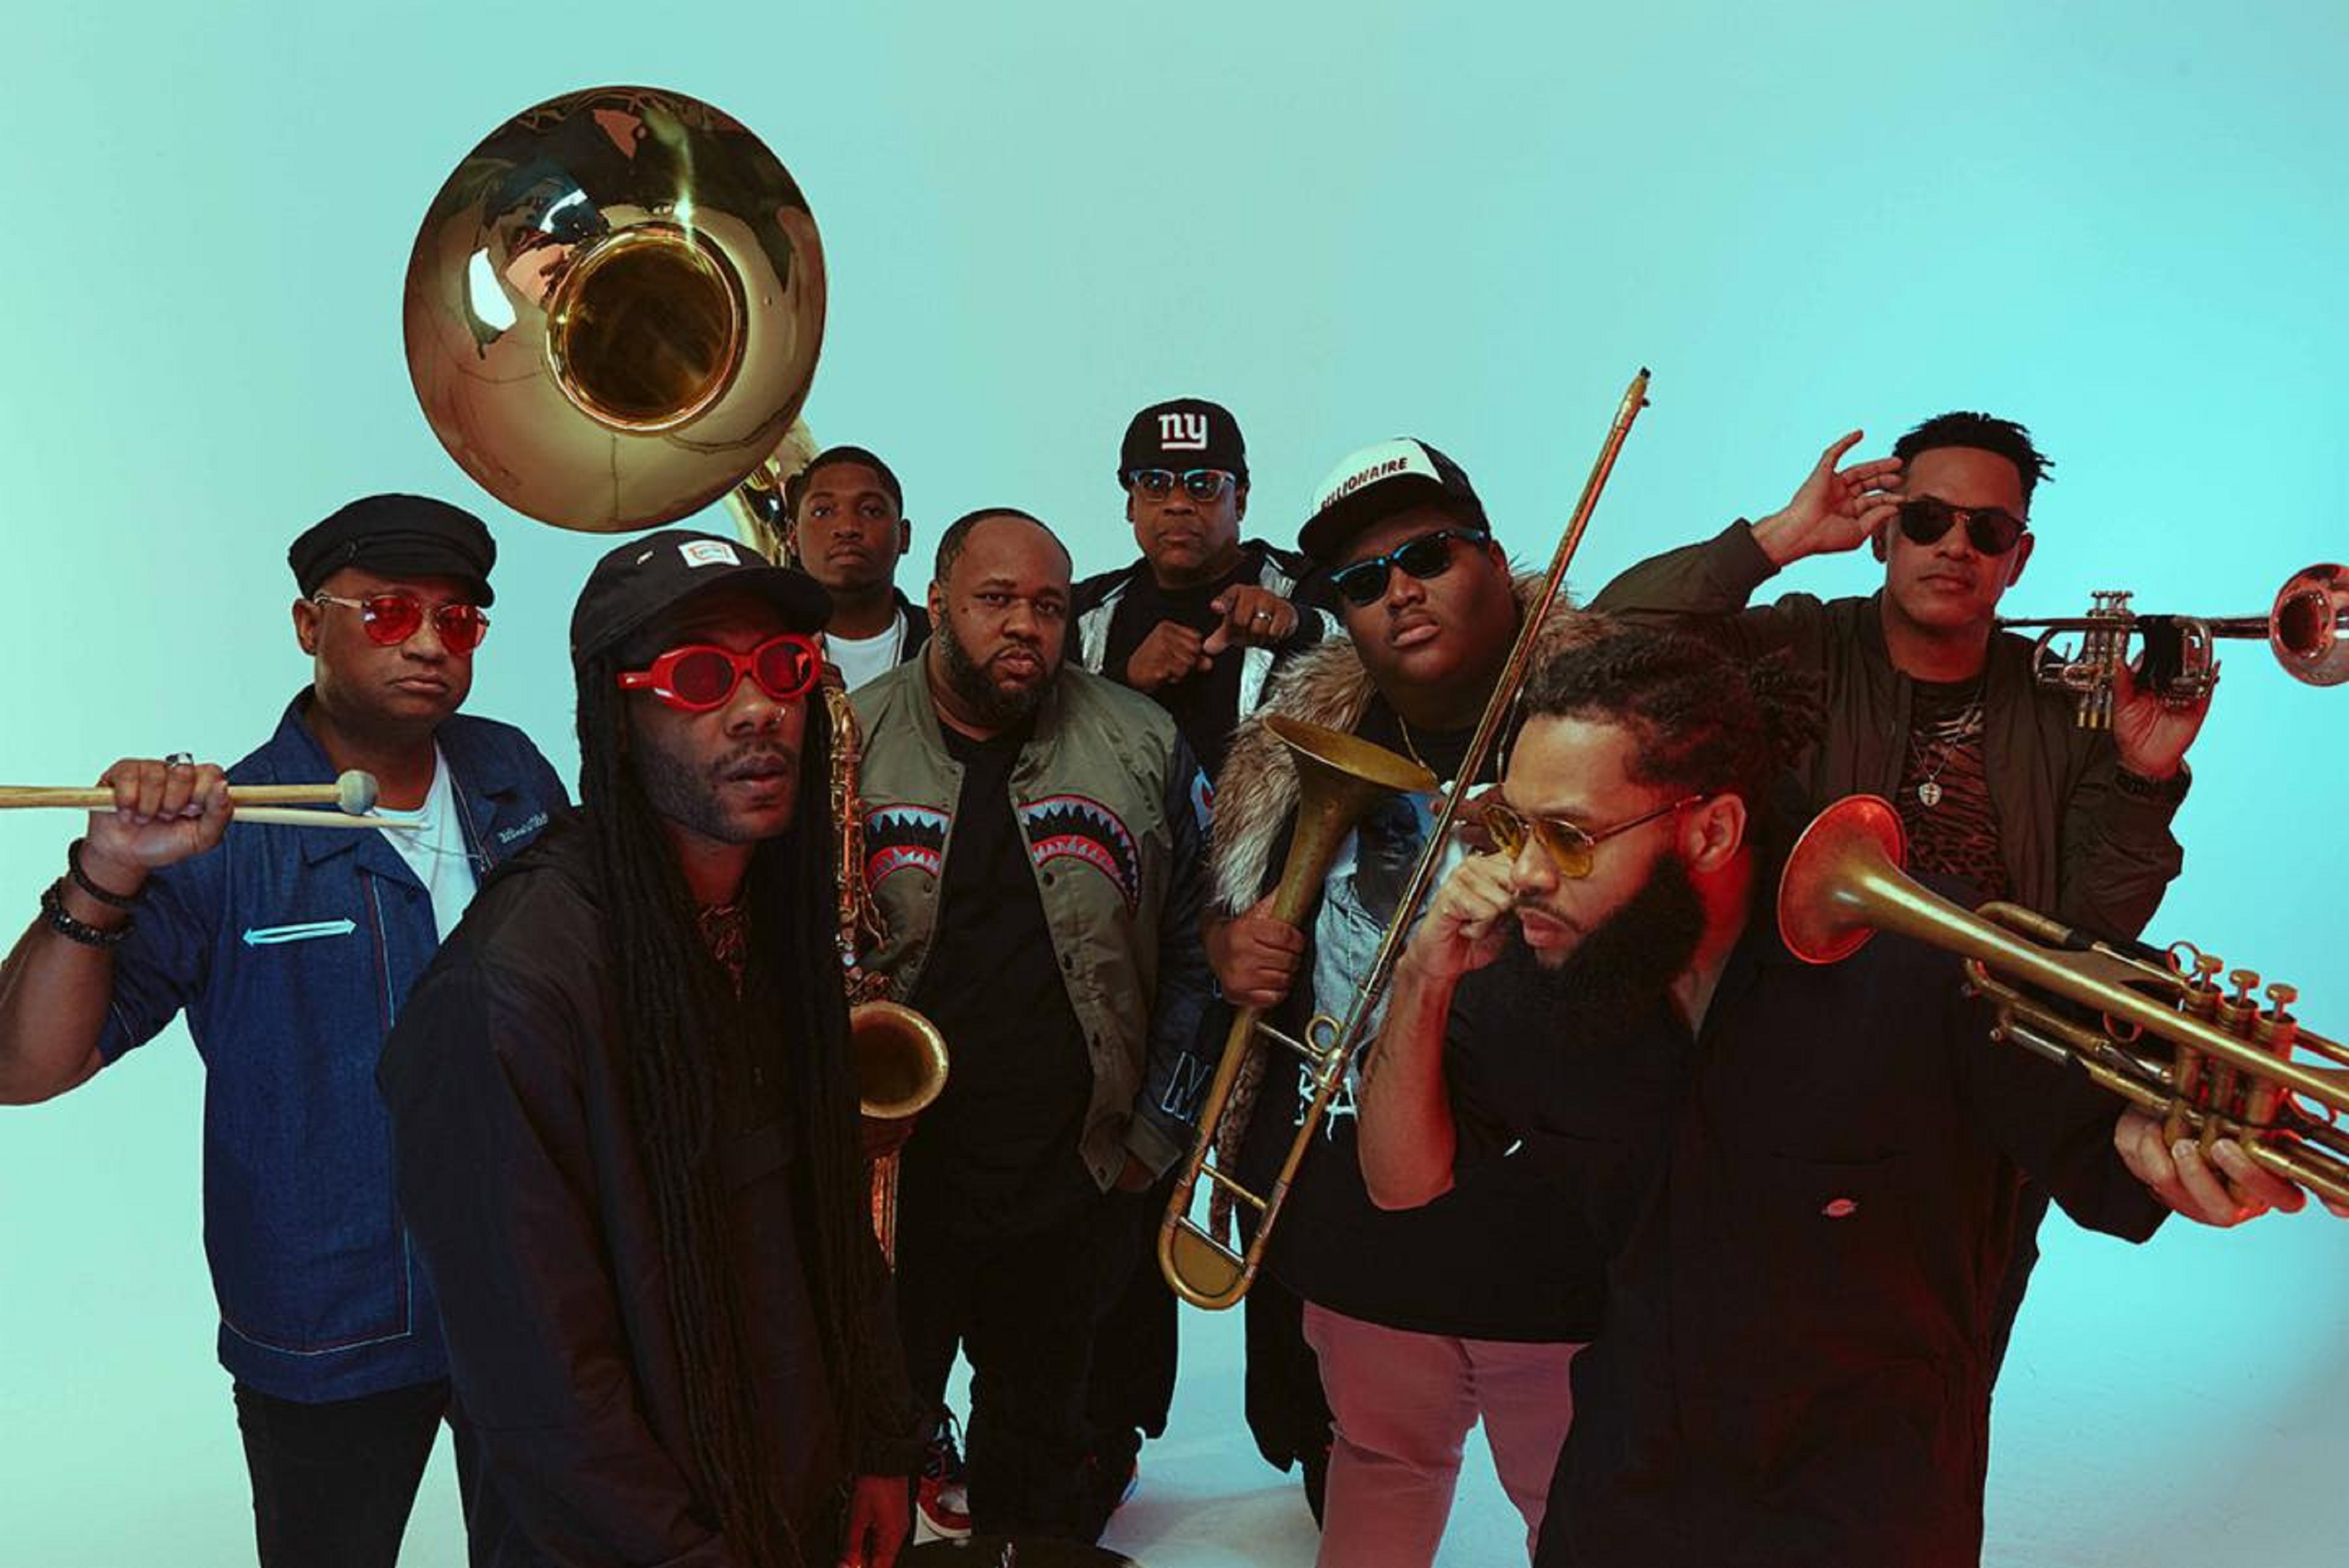 THE SOUL REBELS RELEASE TWO NEW SINGLES IN SONY’S 360 REALITY AUDIO